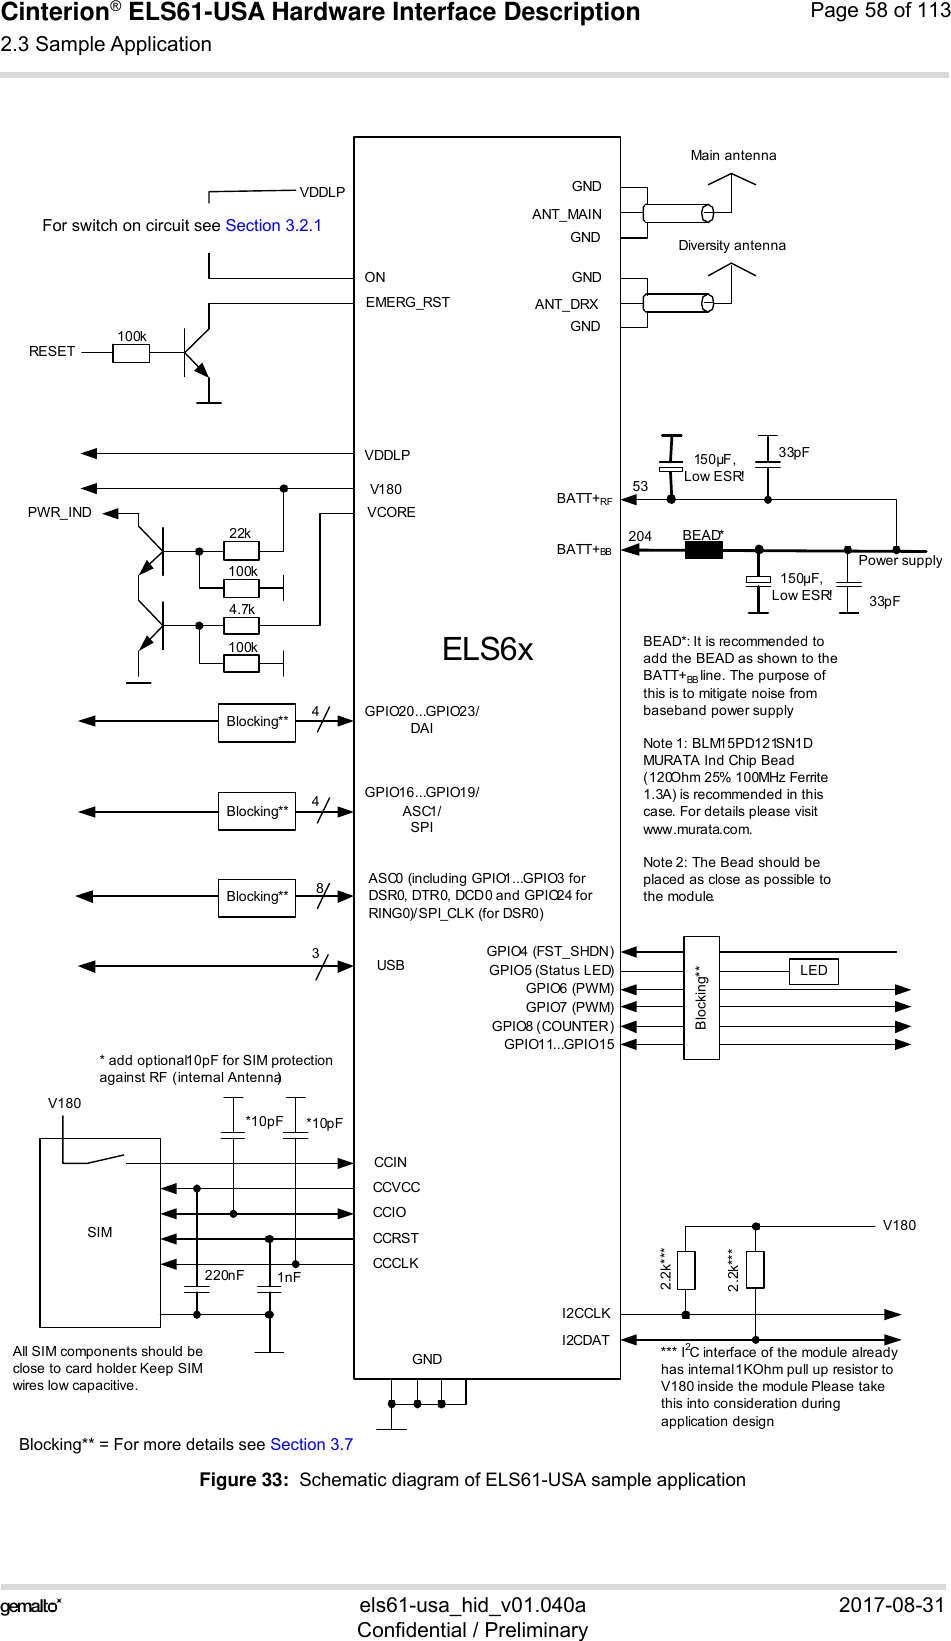 Cinterion® ELS61-USA Hardware Interface Description2.3 Sample Application59els61-usa_hid_v01.040a 2017-08-31Confidential / PreliminaryPage 58 of 113Figure 33:  Schematic diagram of ELS61-USA sample applicationVCOREV180ASC0 (including GPIO1...GPIO3 for DSR0, DTR0, DCD0 and GPIO24 for RING0)/ SPI_CLK (for DSR0)GPIO16...GPIO19/ASC1/SPI84CCVCCCCIOCCCLKCCINCCRSTSIMV180220nF 1nFI2CCLKI2CDAT2.2k***V180GPIO4 (FST_SHDN) GPIO5 (Status LED)GPIO6 (PWM)GPIO7 (PWM)GPIO8 (COUNTER)GPIO11...GPIO15LEDGNDGNDGNDANT_MAINBATT+RFPower supplyMain antennaELS6xAll SIM components should be close to card holder. Keep SIM wires low capacitive.*10pF *10pF* add optional 10pF for SIM protection against RF  (internal Antenna)150µF,Low ESR! 33pFBlocking**Blocking**Blocking**PWR_INDBATT+BB53204GPIO20...GPIO23/DAI4Blocking**100k4.7k100k22k2.2k***3USB150µF,Low ESR!33pFGNDGNDANT_DRXDiversity antennaONEMERG_RSTRESETVDDLP100kVDDLPBEAD*BEAD*: It is recommended to add the BEAD as shown to the BATT+BB line. The purpose of this is to mitigate noise from baseband power supply. Note 1: BLM15PD121SN1D MURATA Ind Chip Bead (120Ohm 25% 100MHz Ferrite 1.3A) is recommended in this case. For details please visit www.murata.com.Note 2: The Bead should be placed as close as possible to the module. *** I2C interface of the module already has internal 1KOhm pull up resistor to V180 inside the module. Please take this into consideration during application design. Blocking** = For more details see Section 3.7For switch on circuit see Section 3.2.1